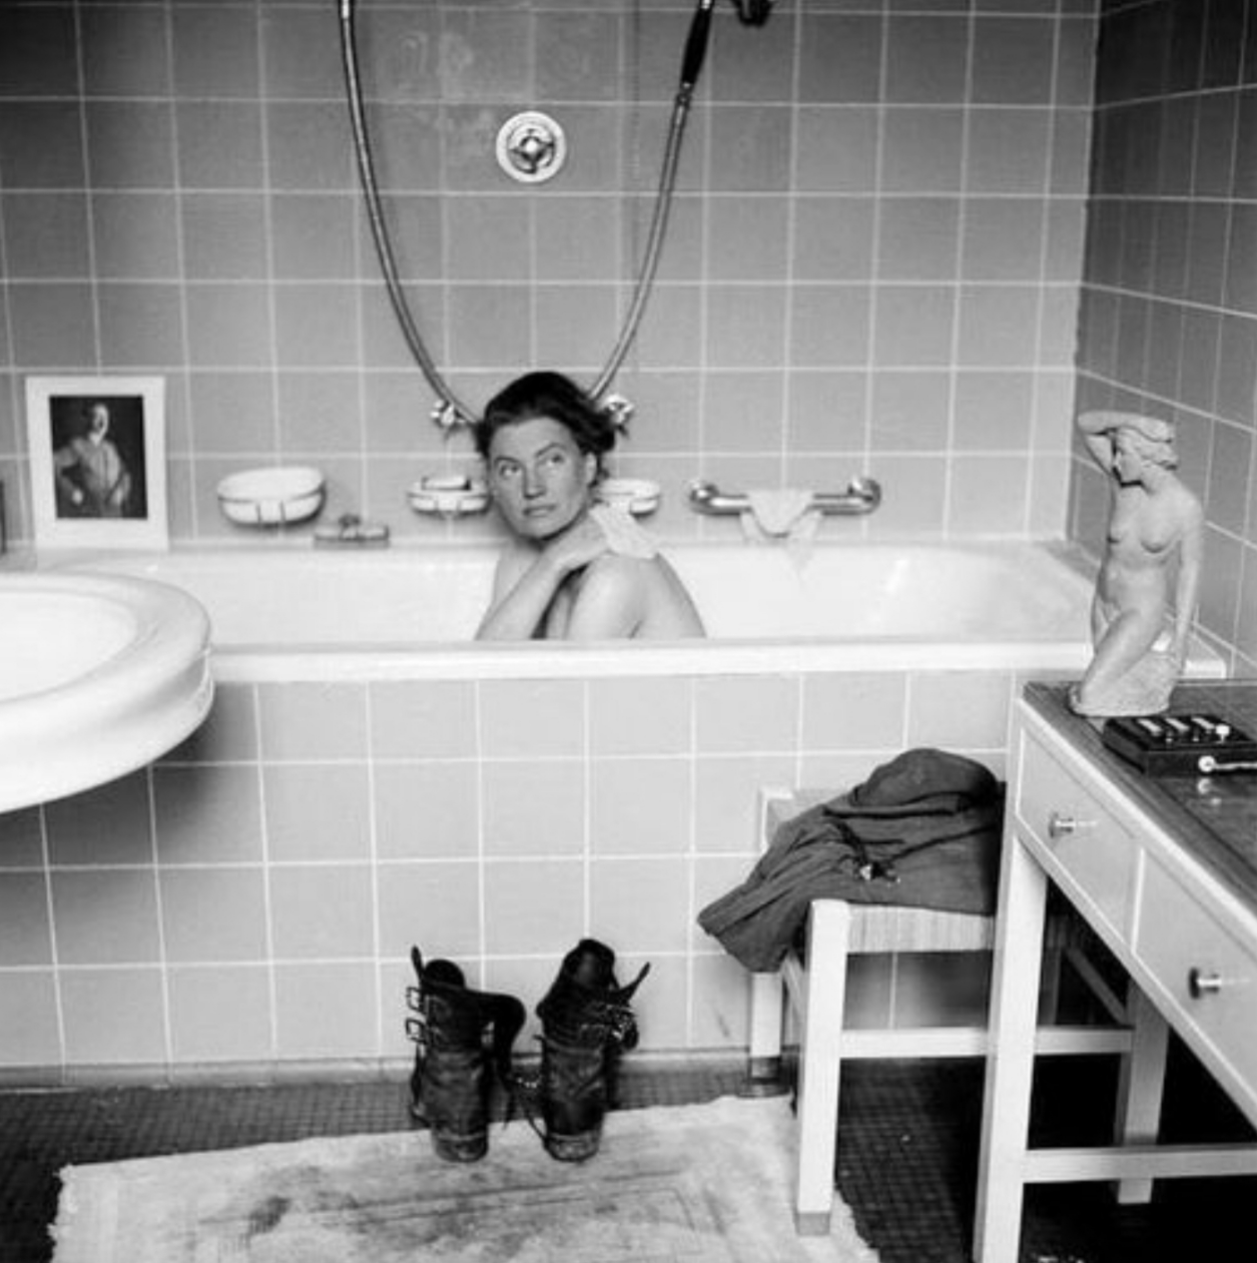 Lee Miller was a photojournalist and one of the first to enter Hitler's apartment after his suicide. She took a bath and even slept in his bed.